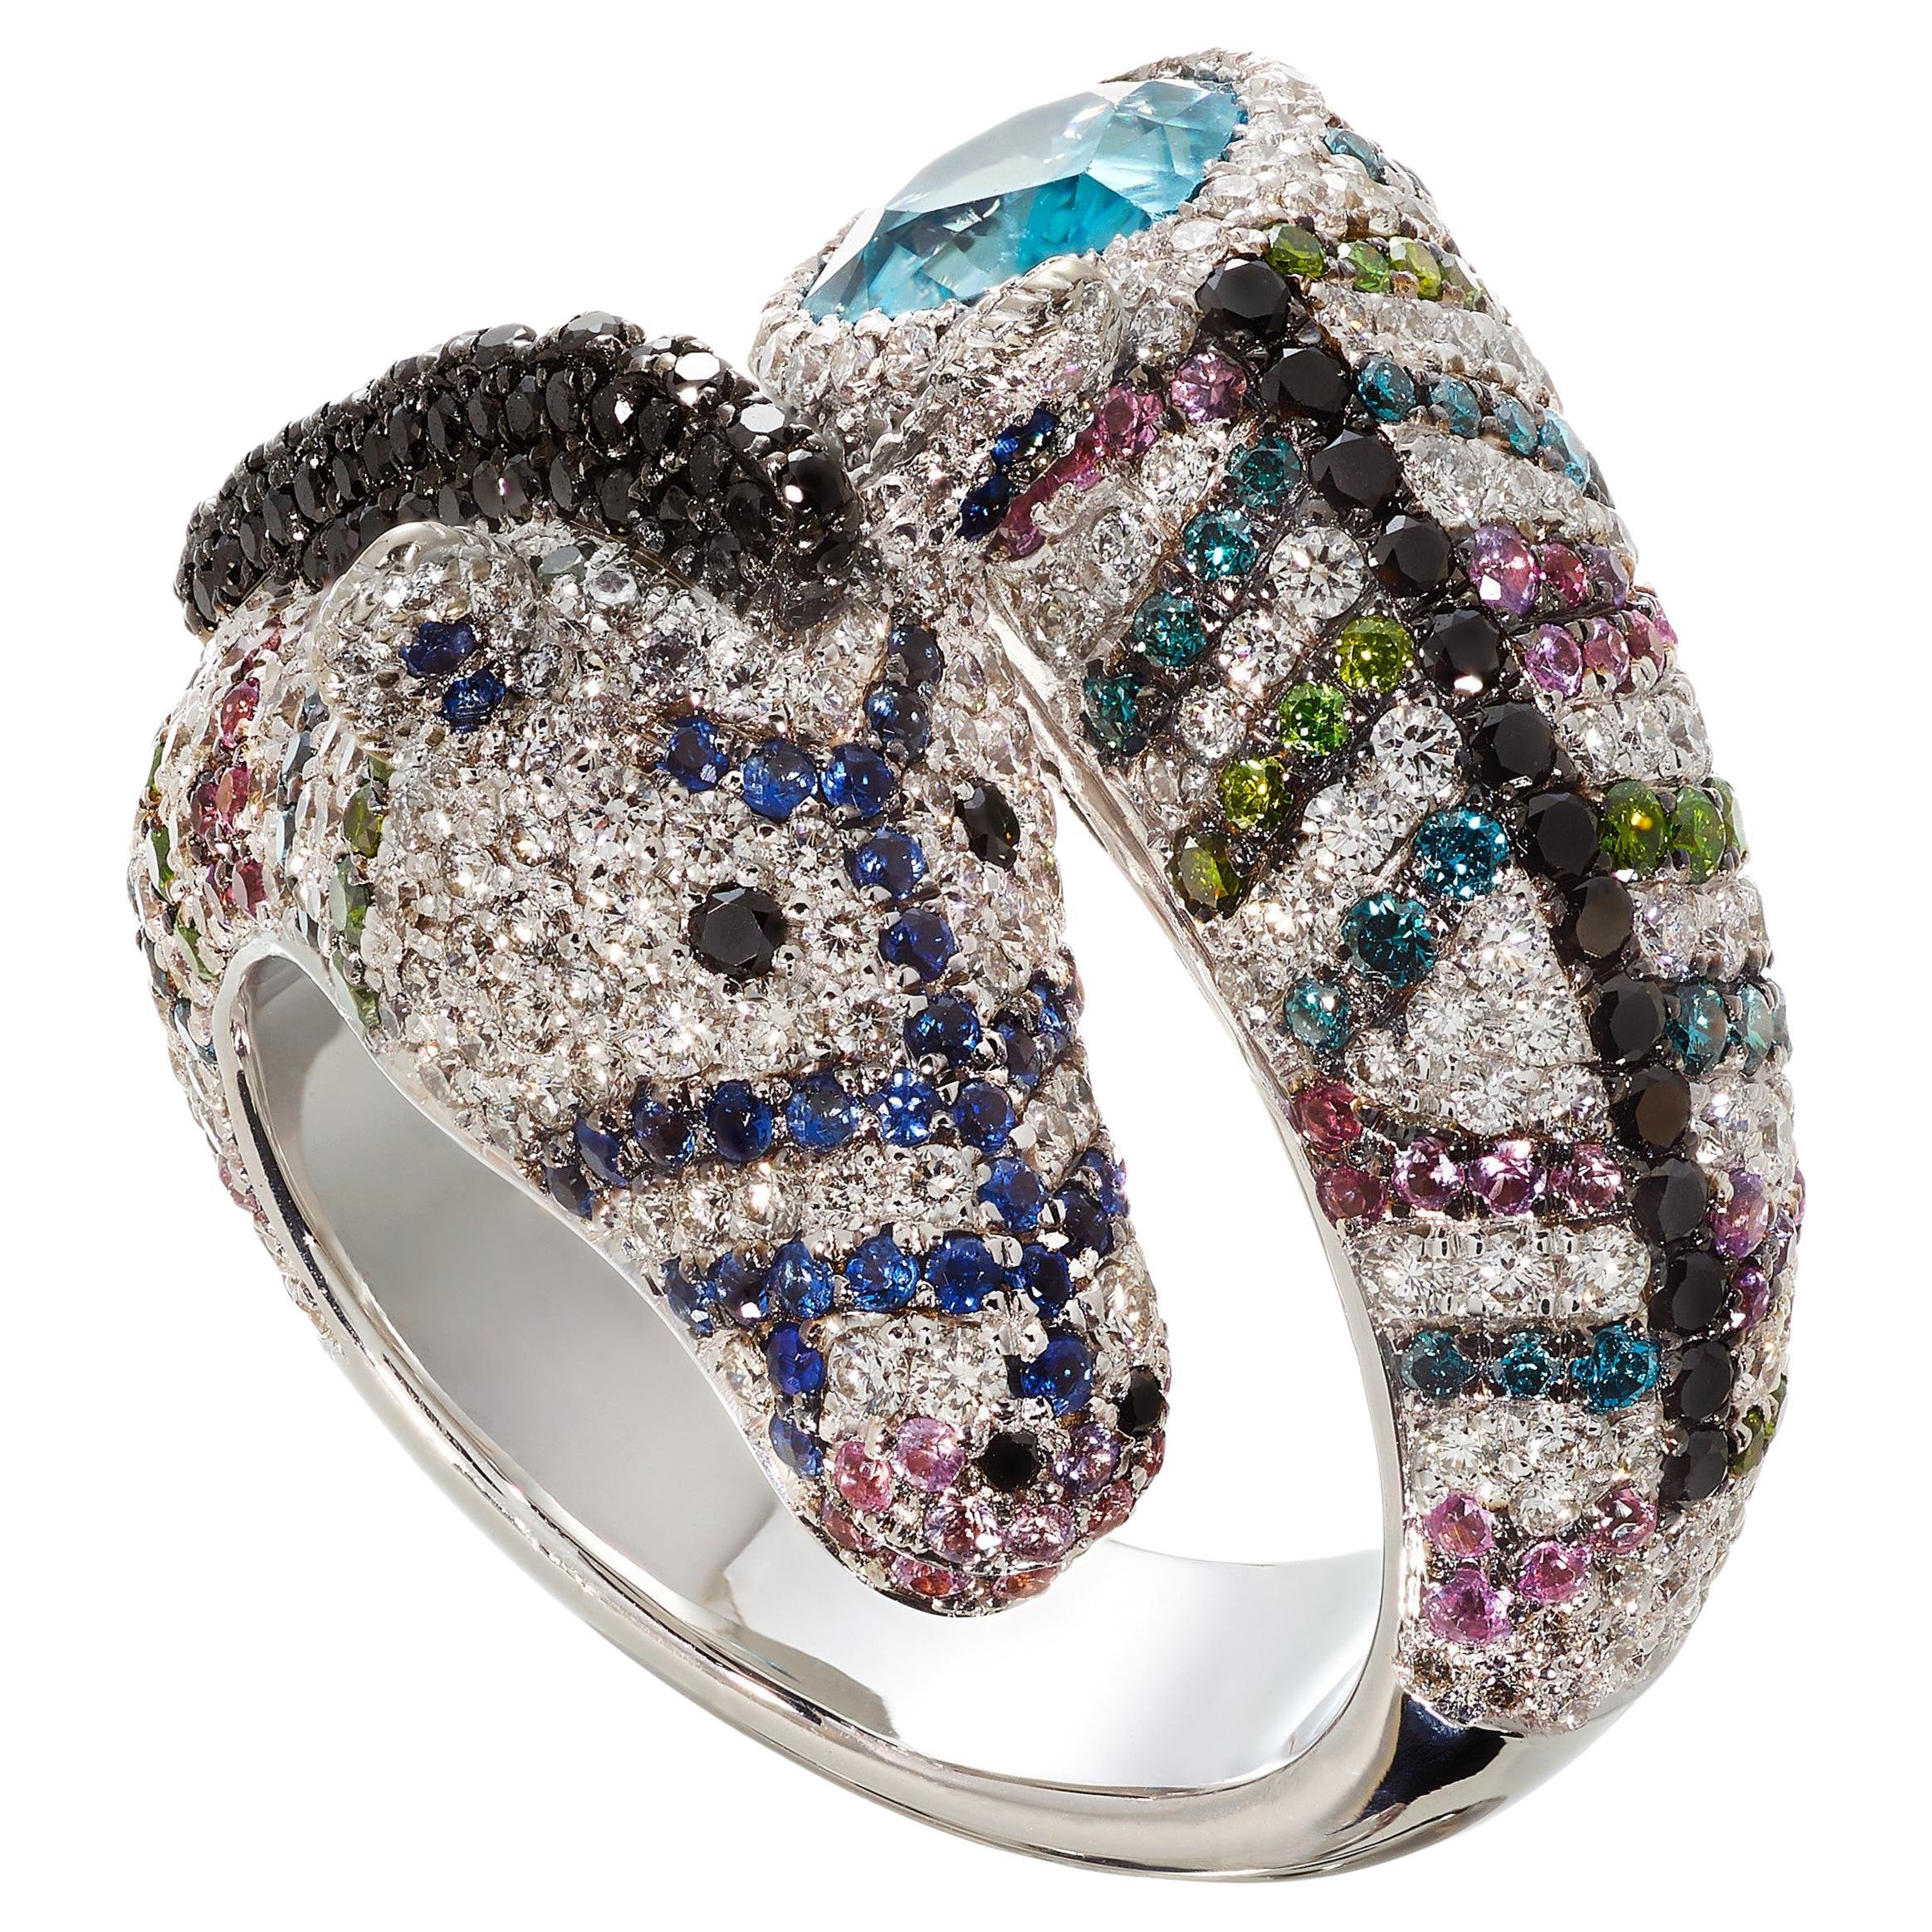 Contemporary White Gold "Zebra" Ring set with Diamonds, Sapphires and a Zircon